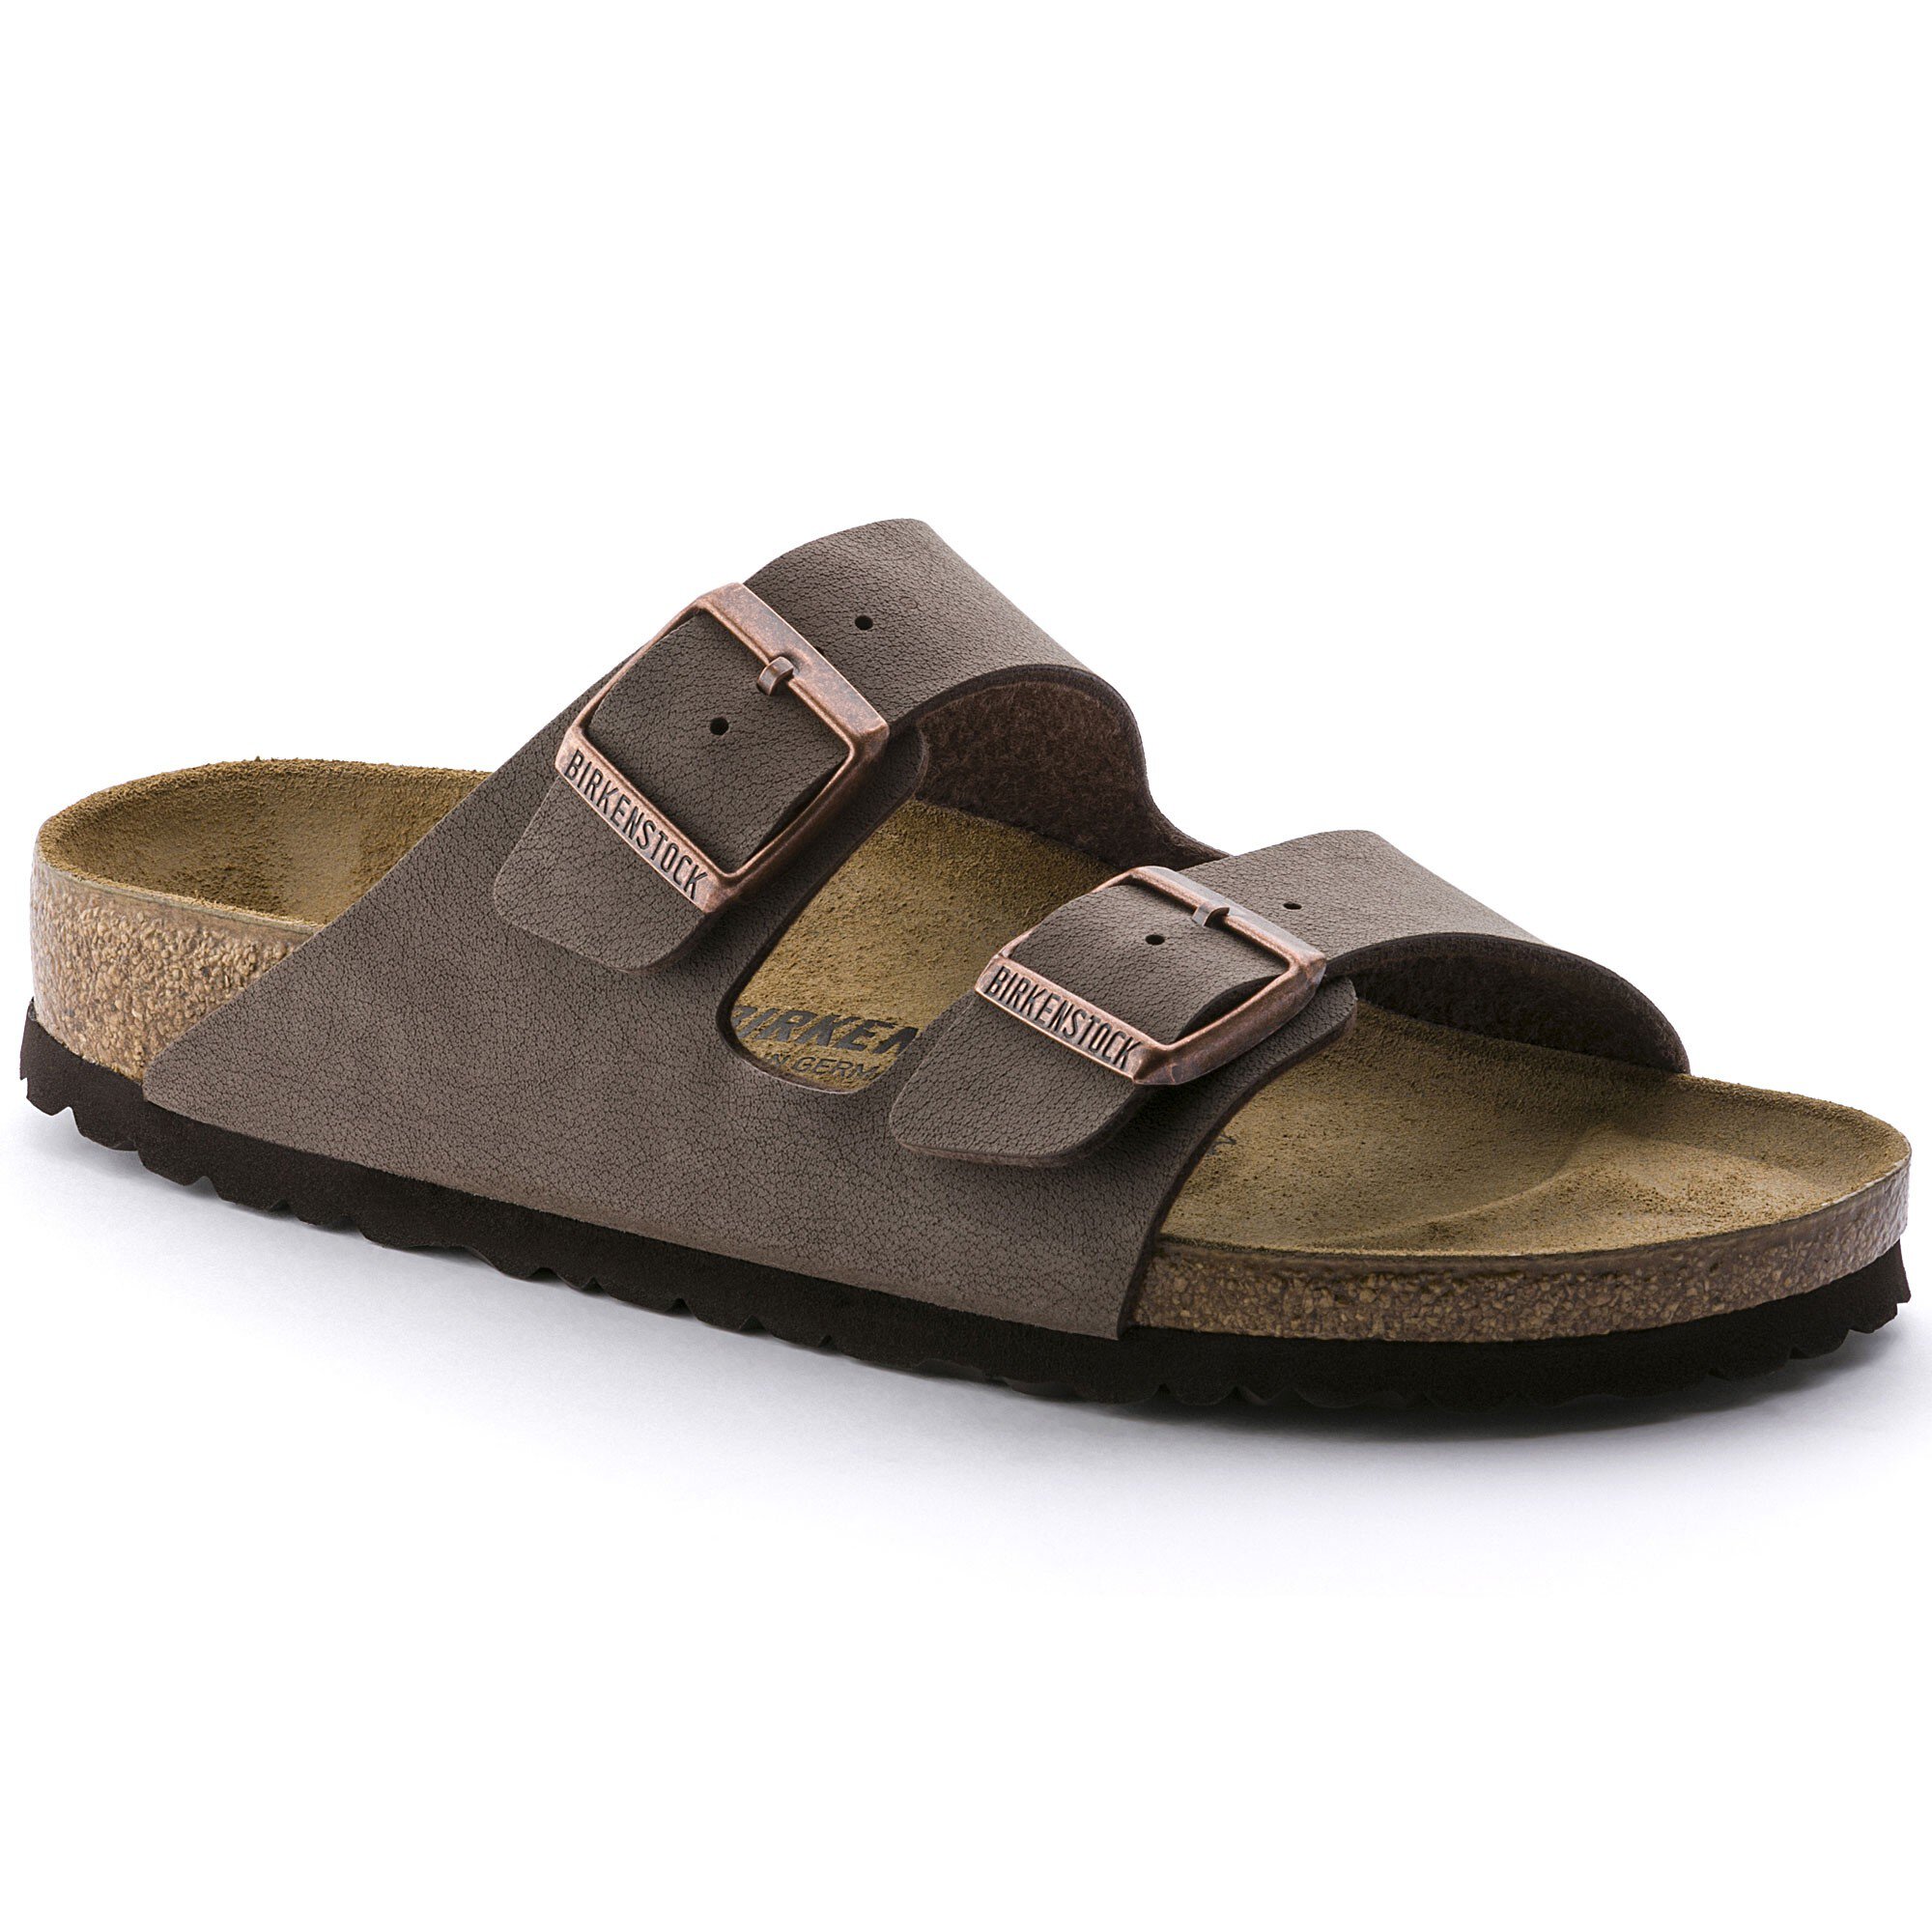 As Searches For Birkenstocks Explode, These Are The Exact Sandals From ...